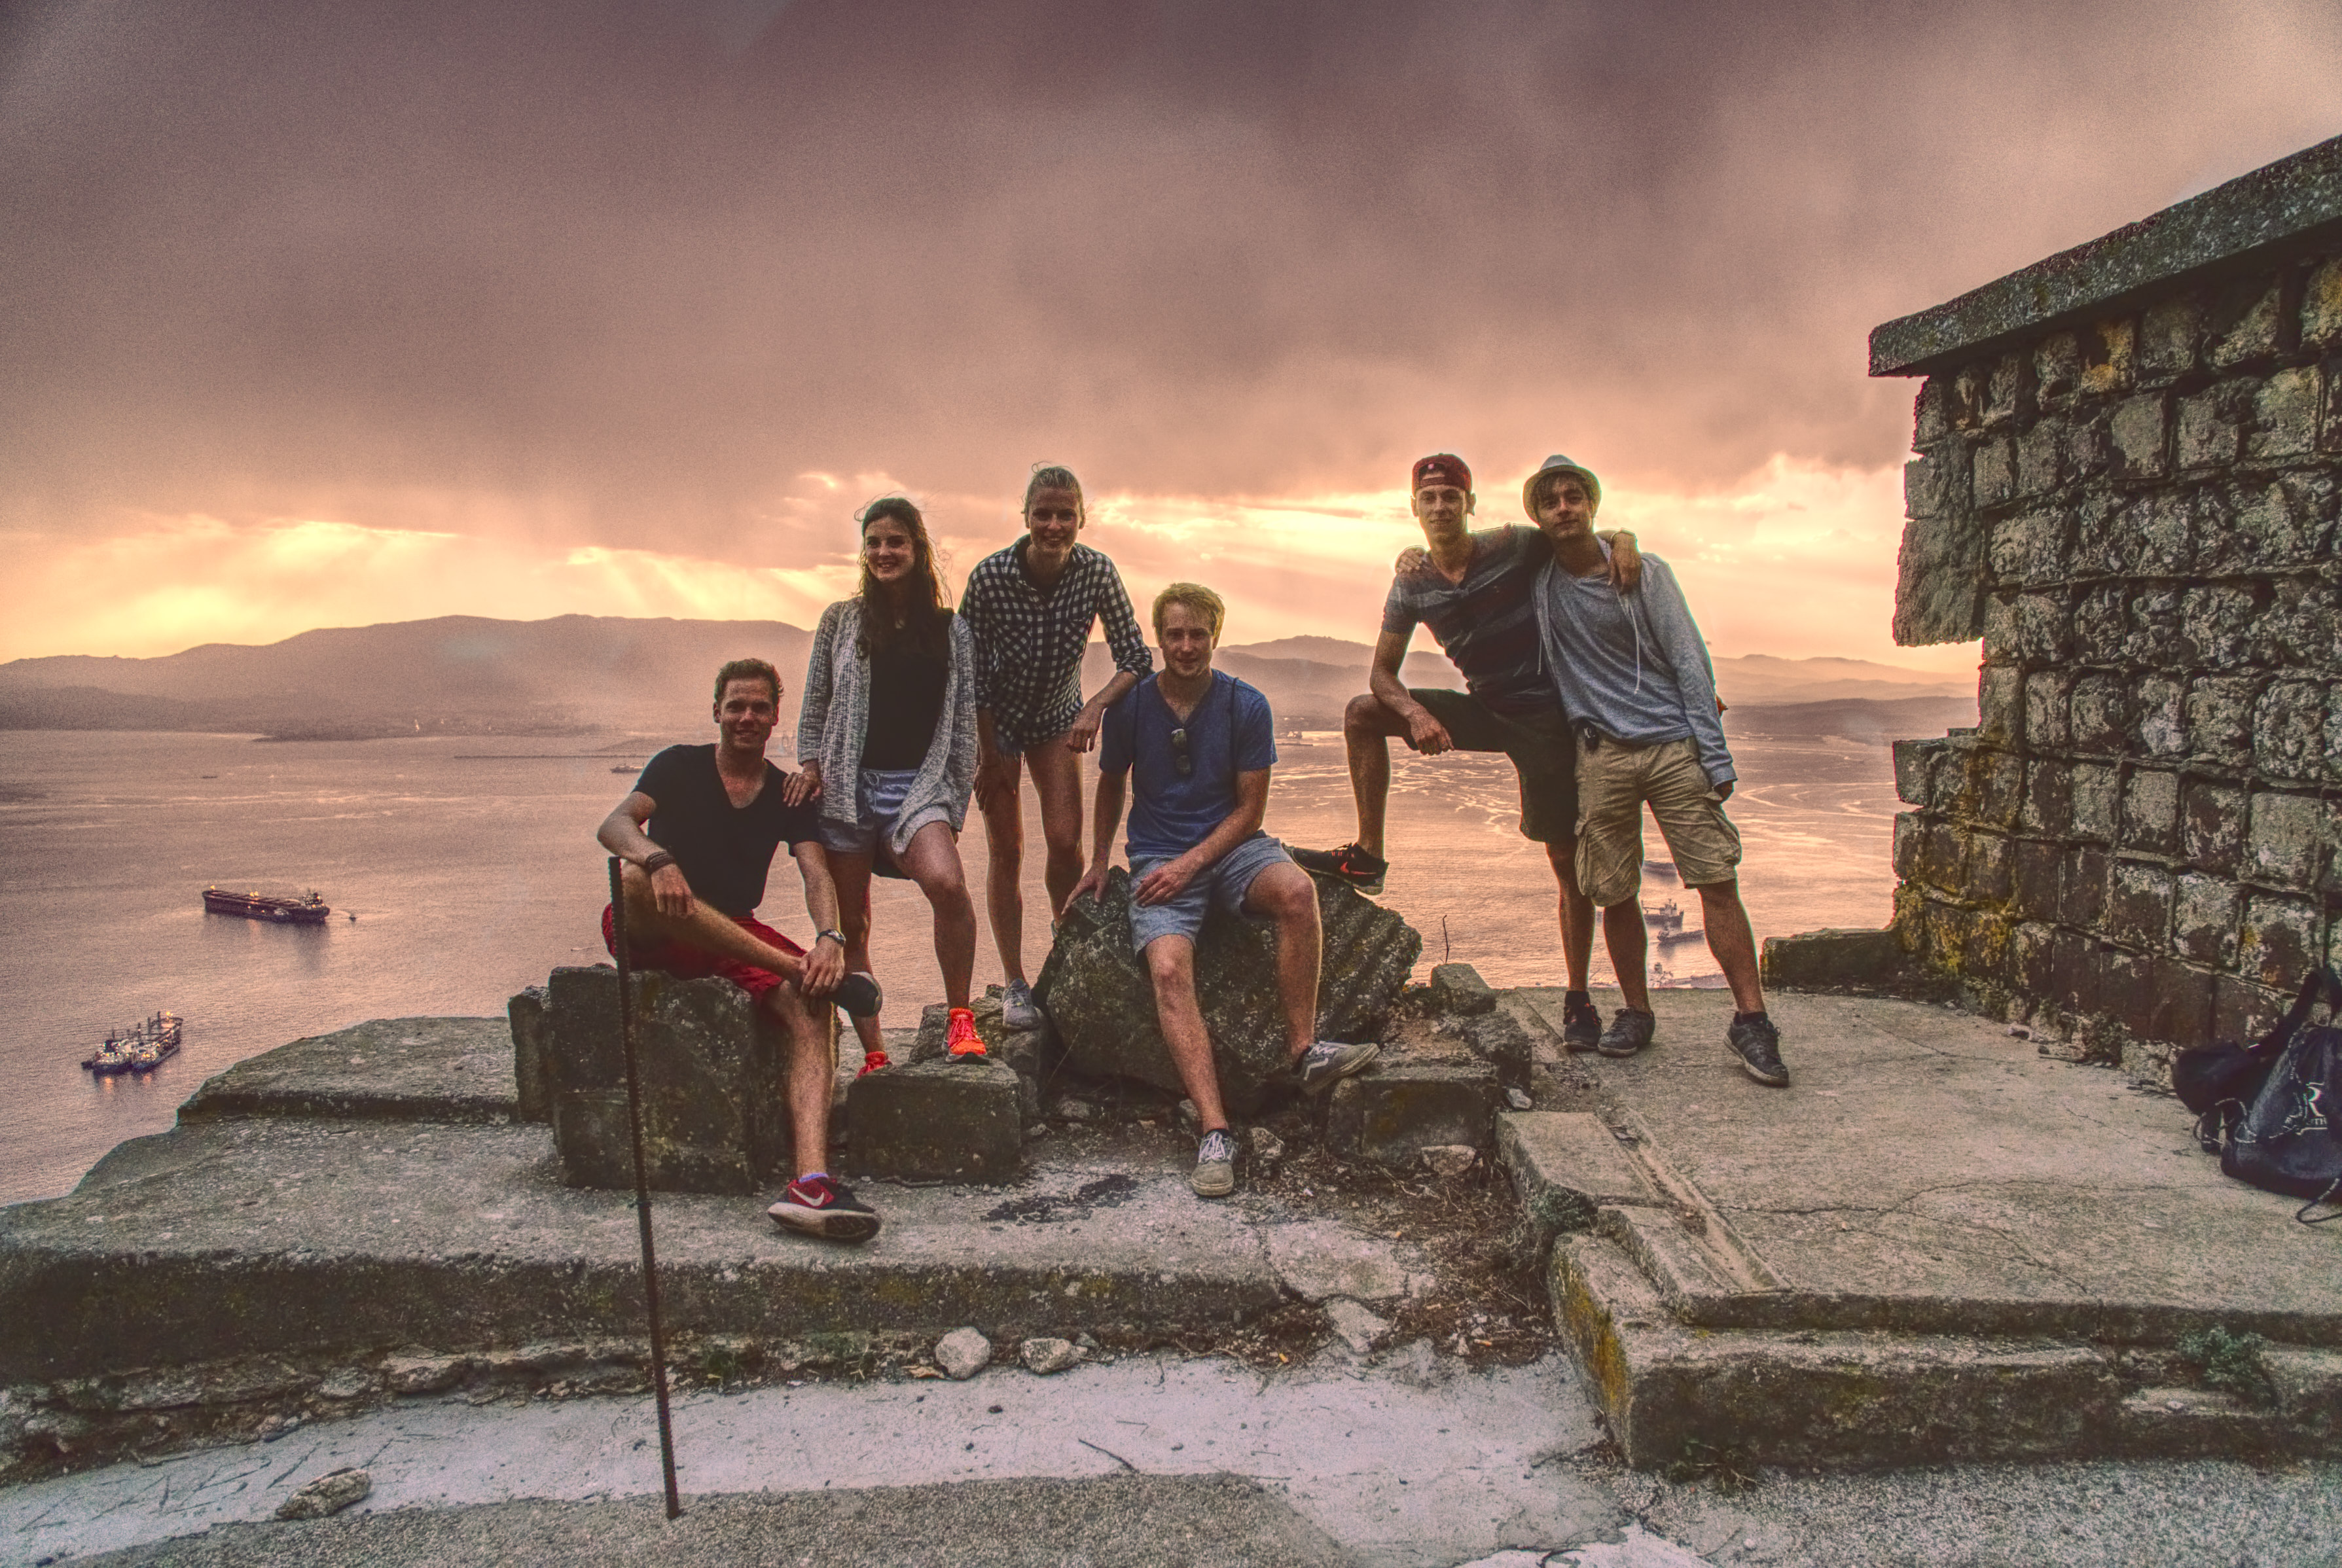 Group picture in front of the sunset / rain mixture